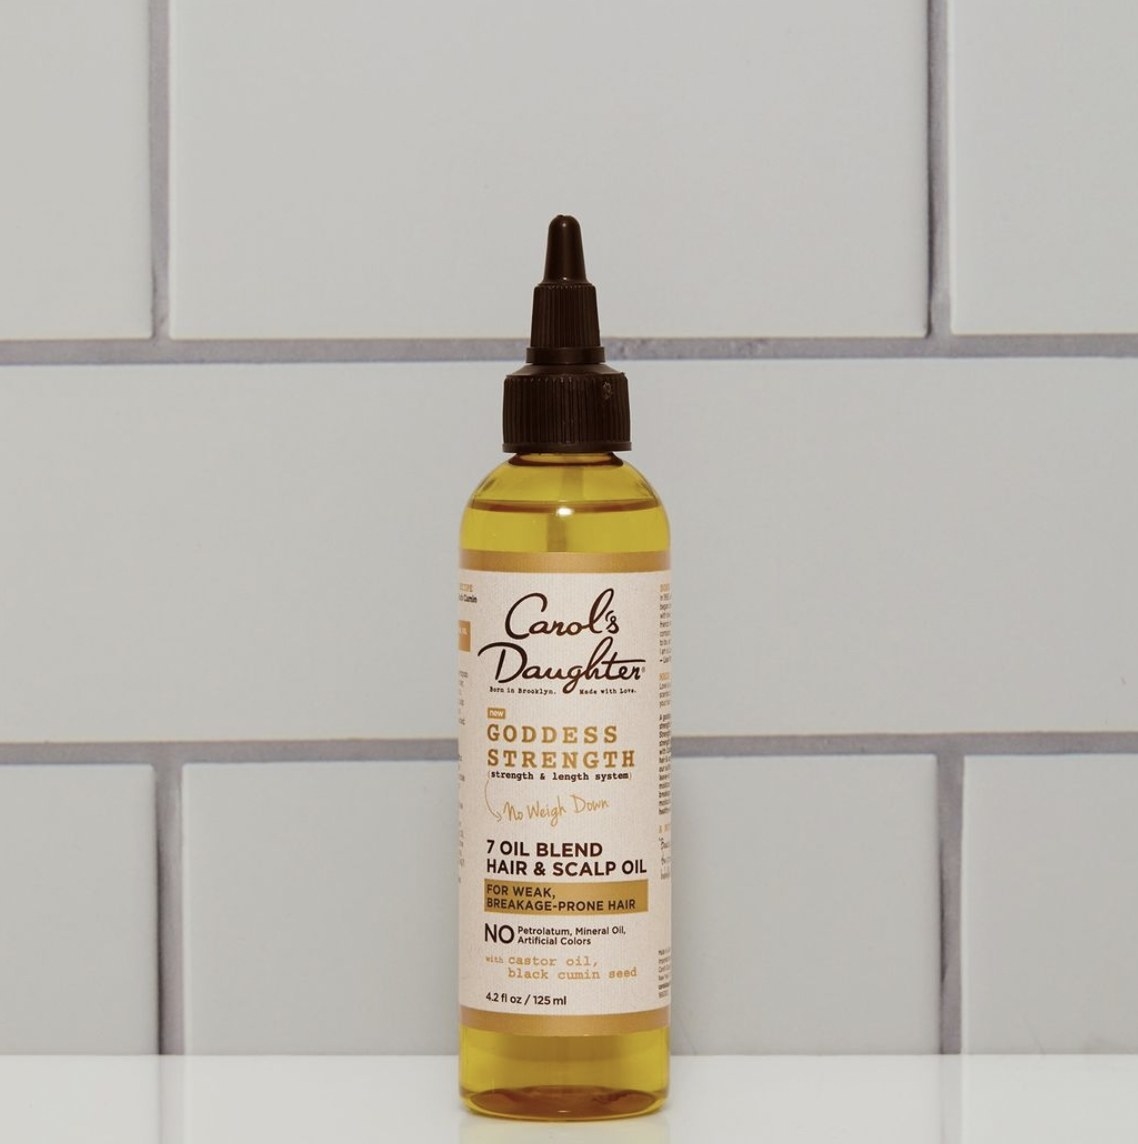 A bottle of hair and scalp oil